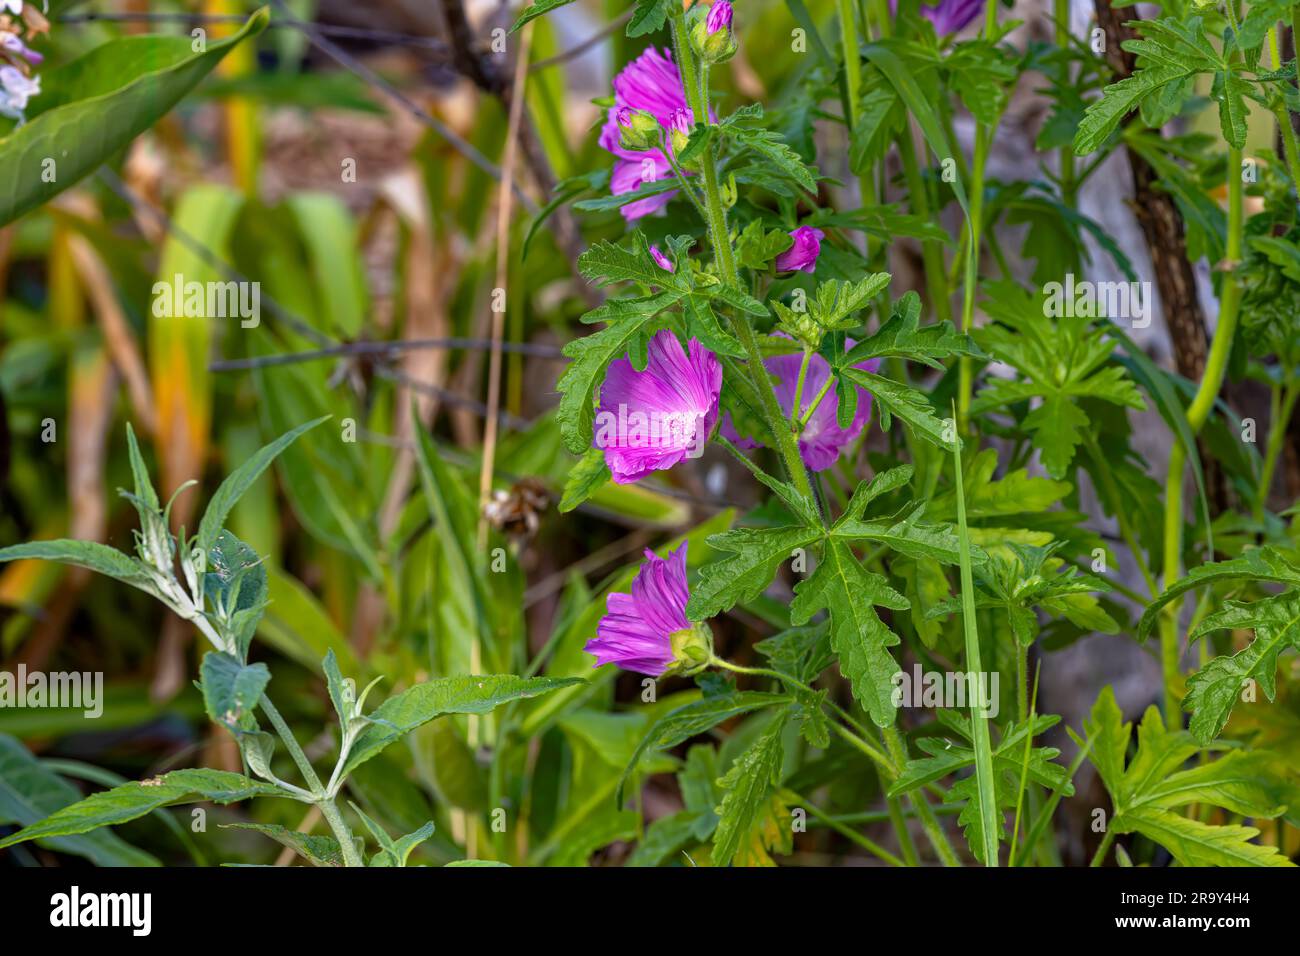 Musk mallow (Malva moschata) plant flowering. Pink flowers on plant in the family Malvaceae, showing deeply cut leaves. Stock Photo